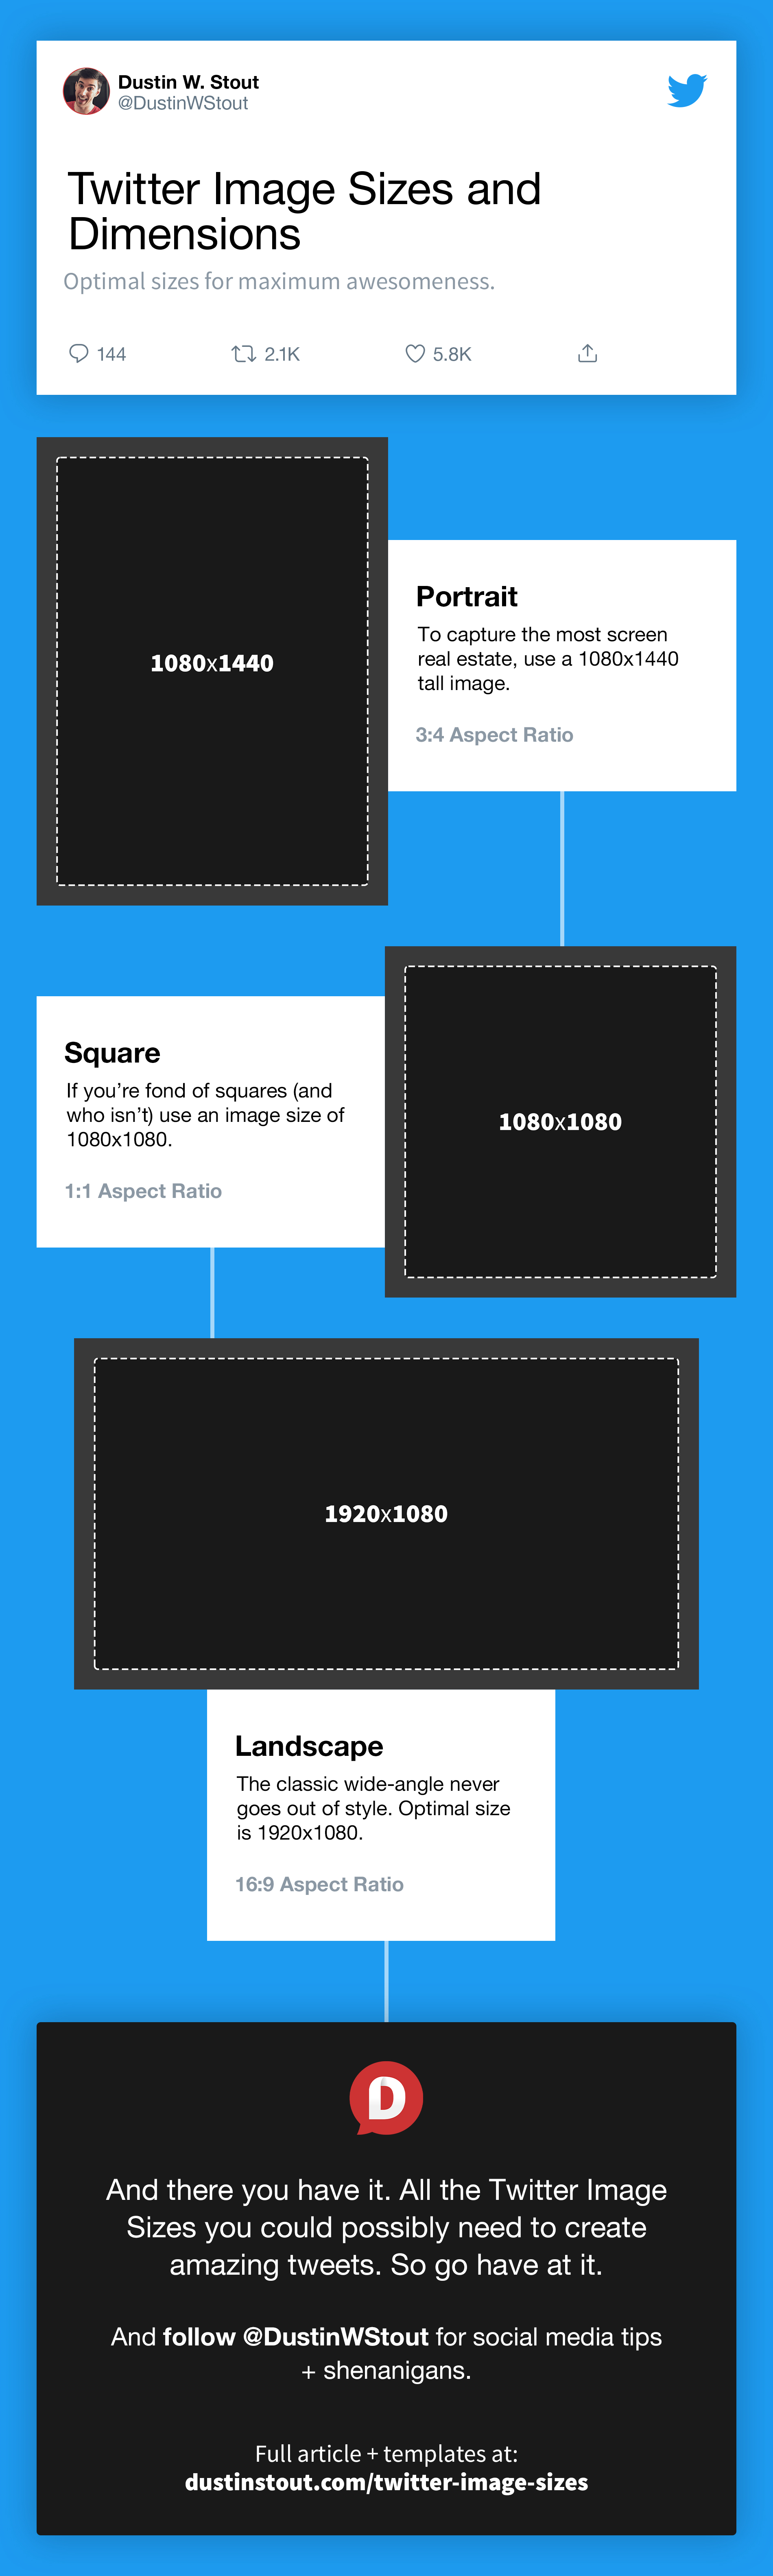 Twitter Image Sizes & Dimensions 2022